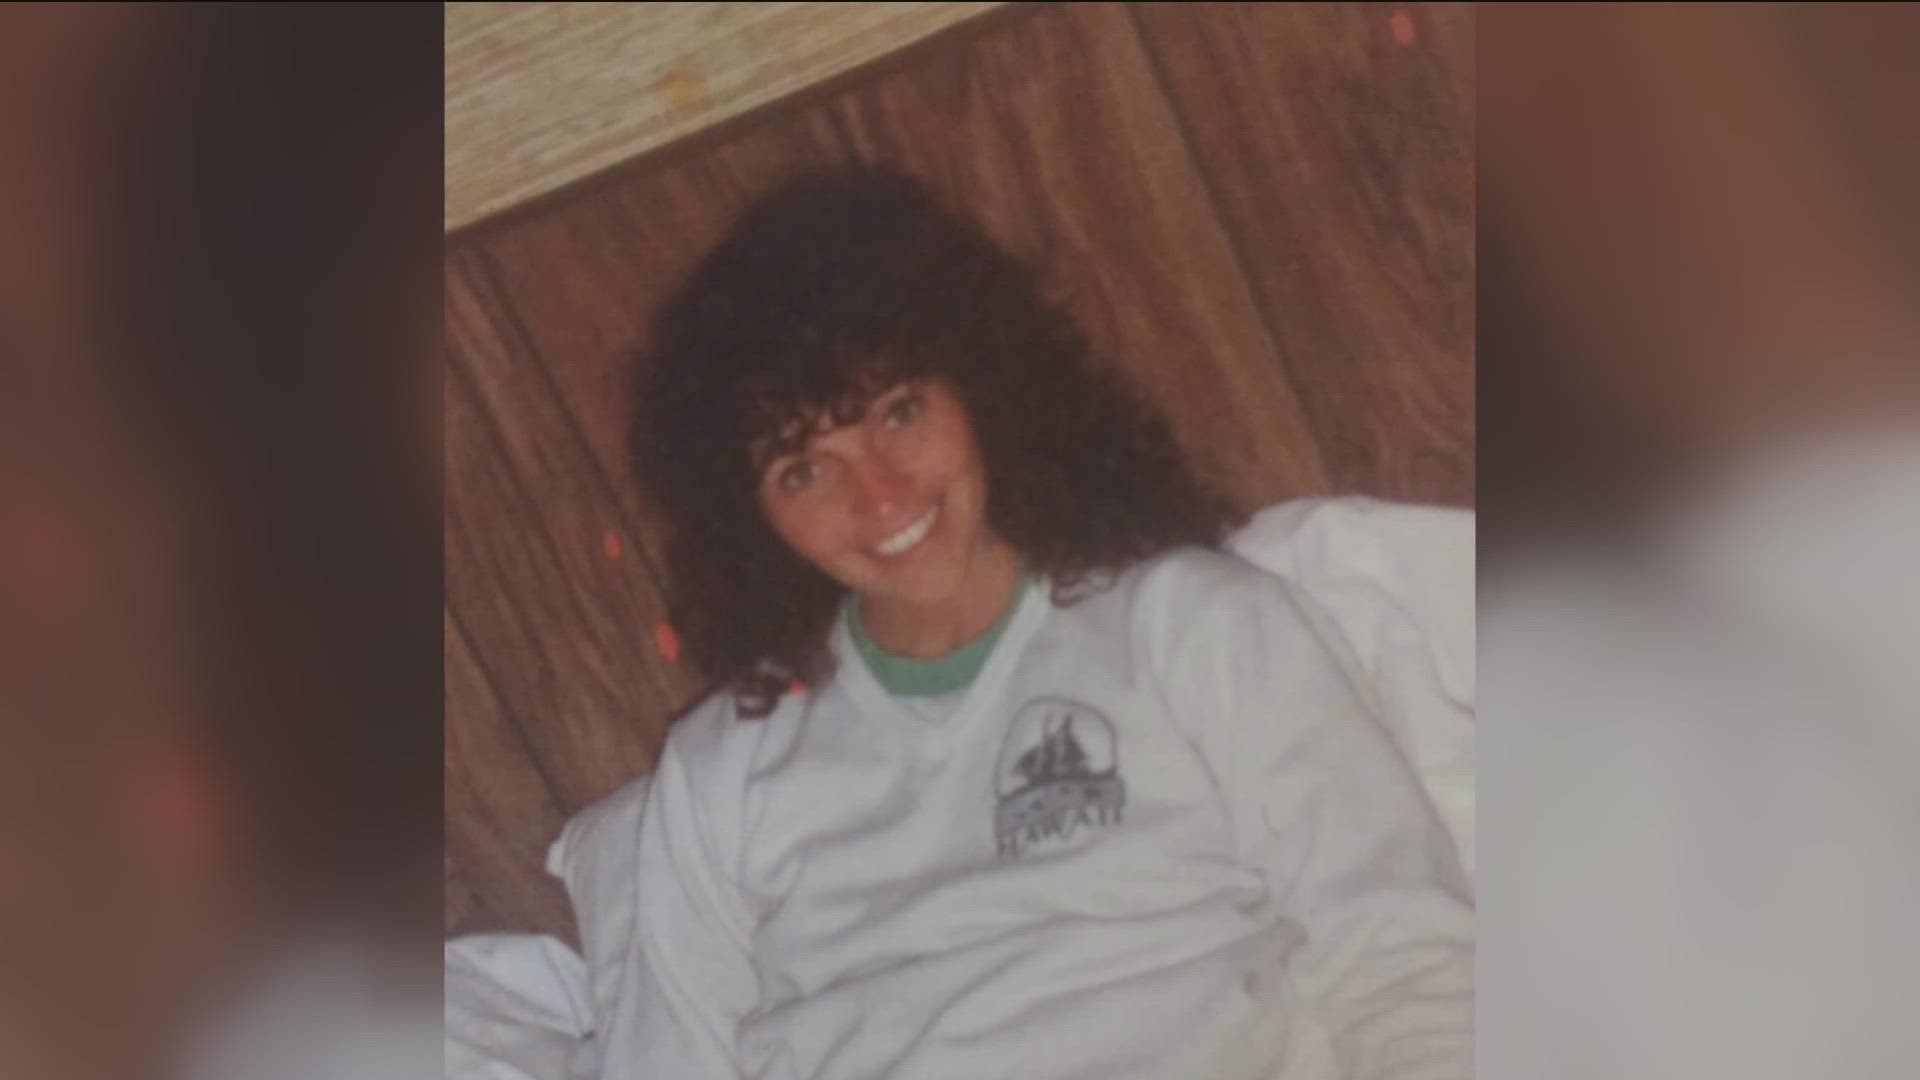 DNA testing revealed the culprit of a Sylvania woman's murder in 1985.